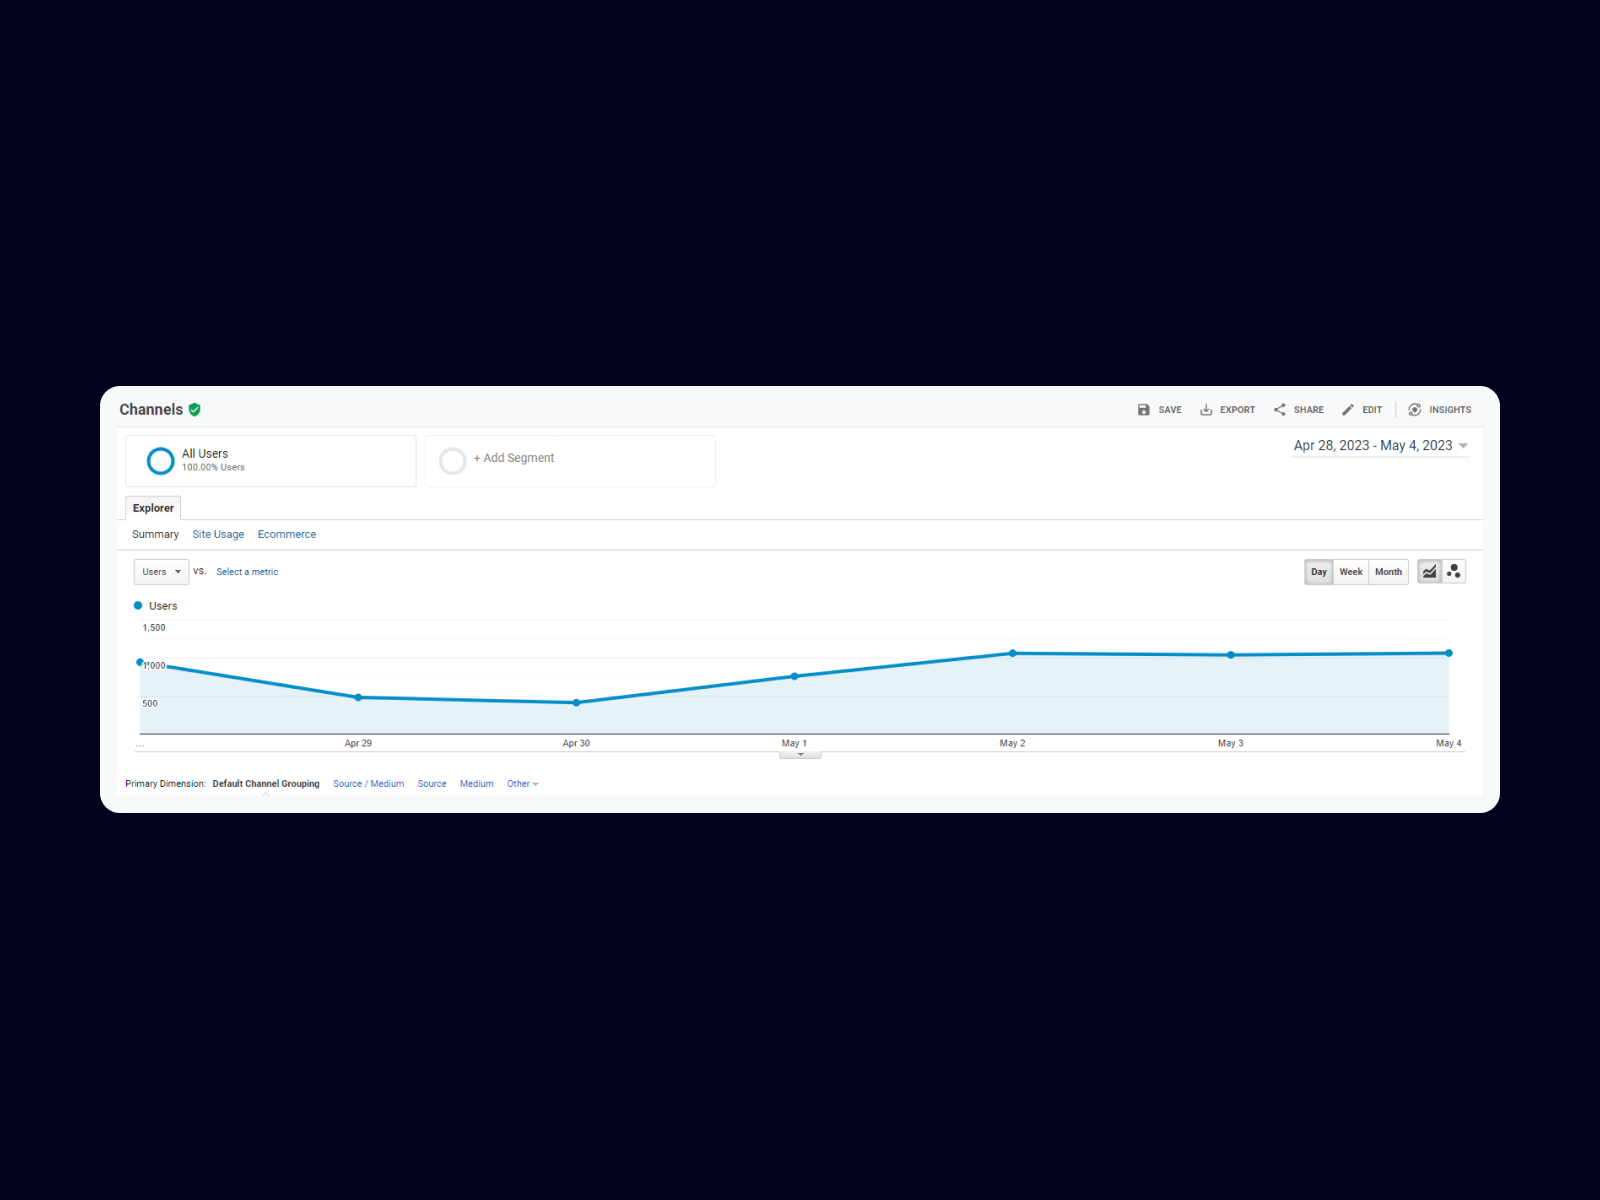 With Google Analytics, you can view traffic data and track your progress